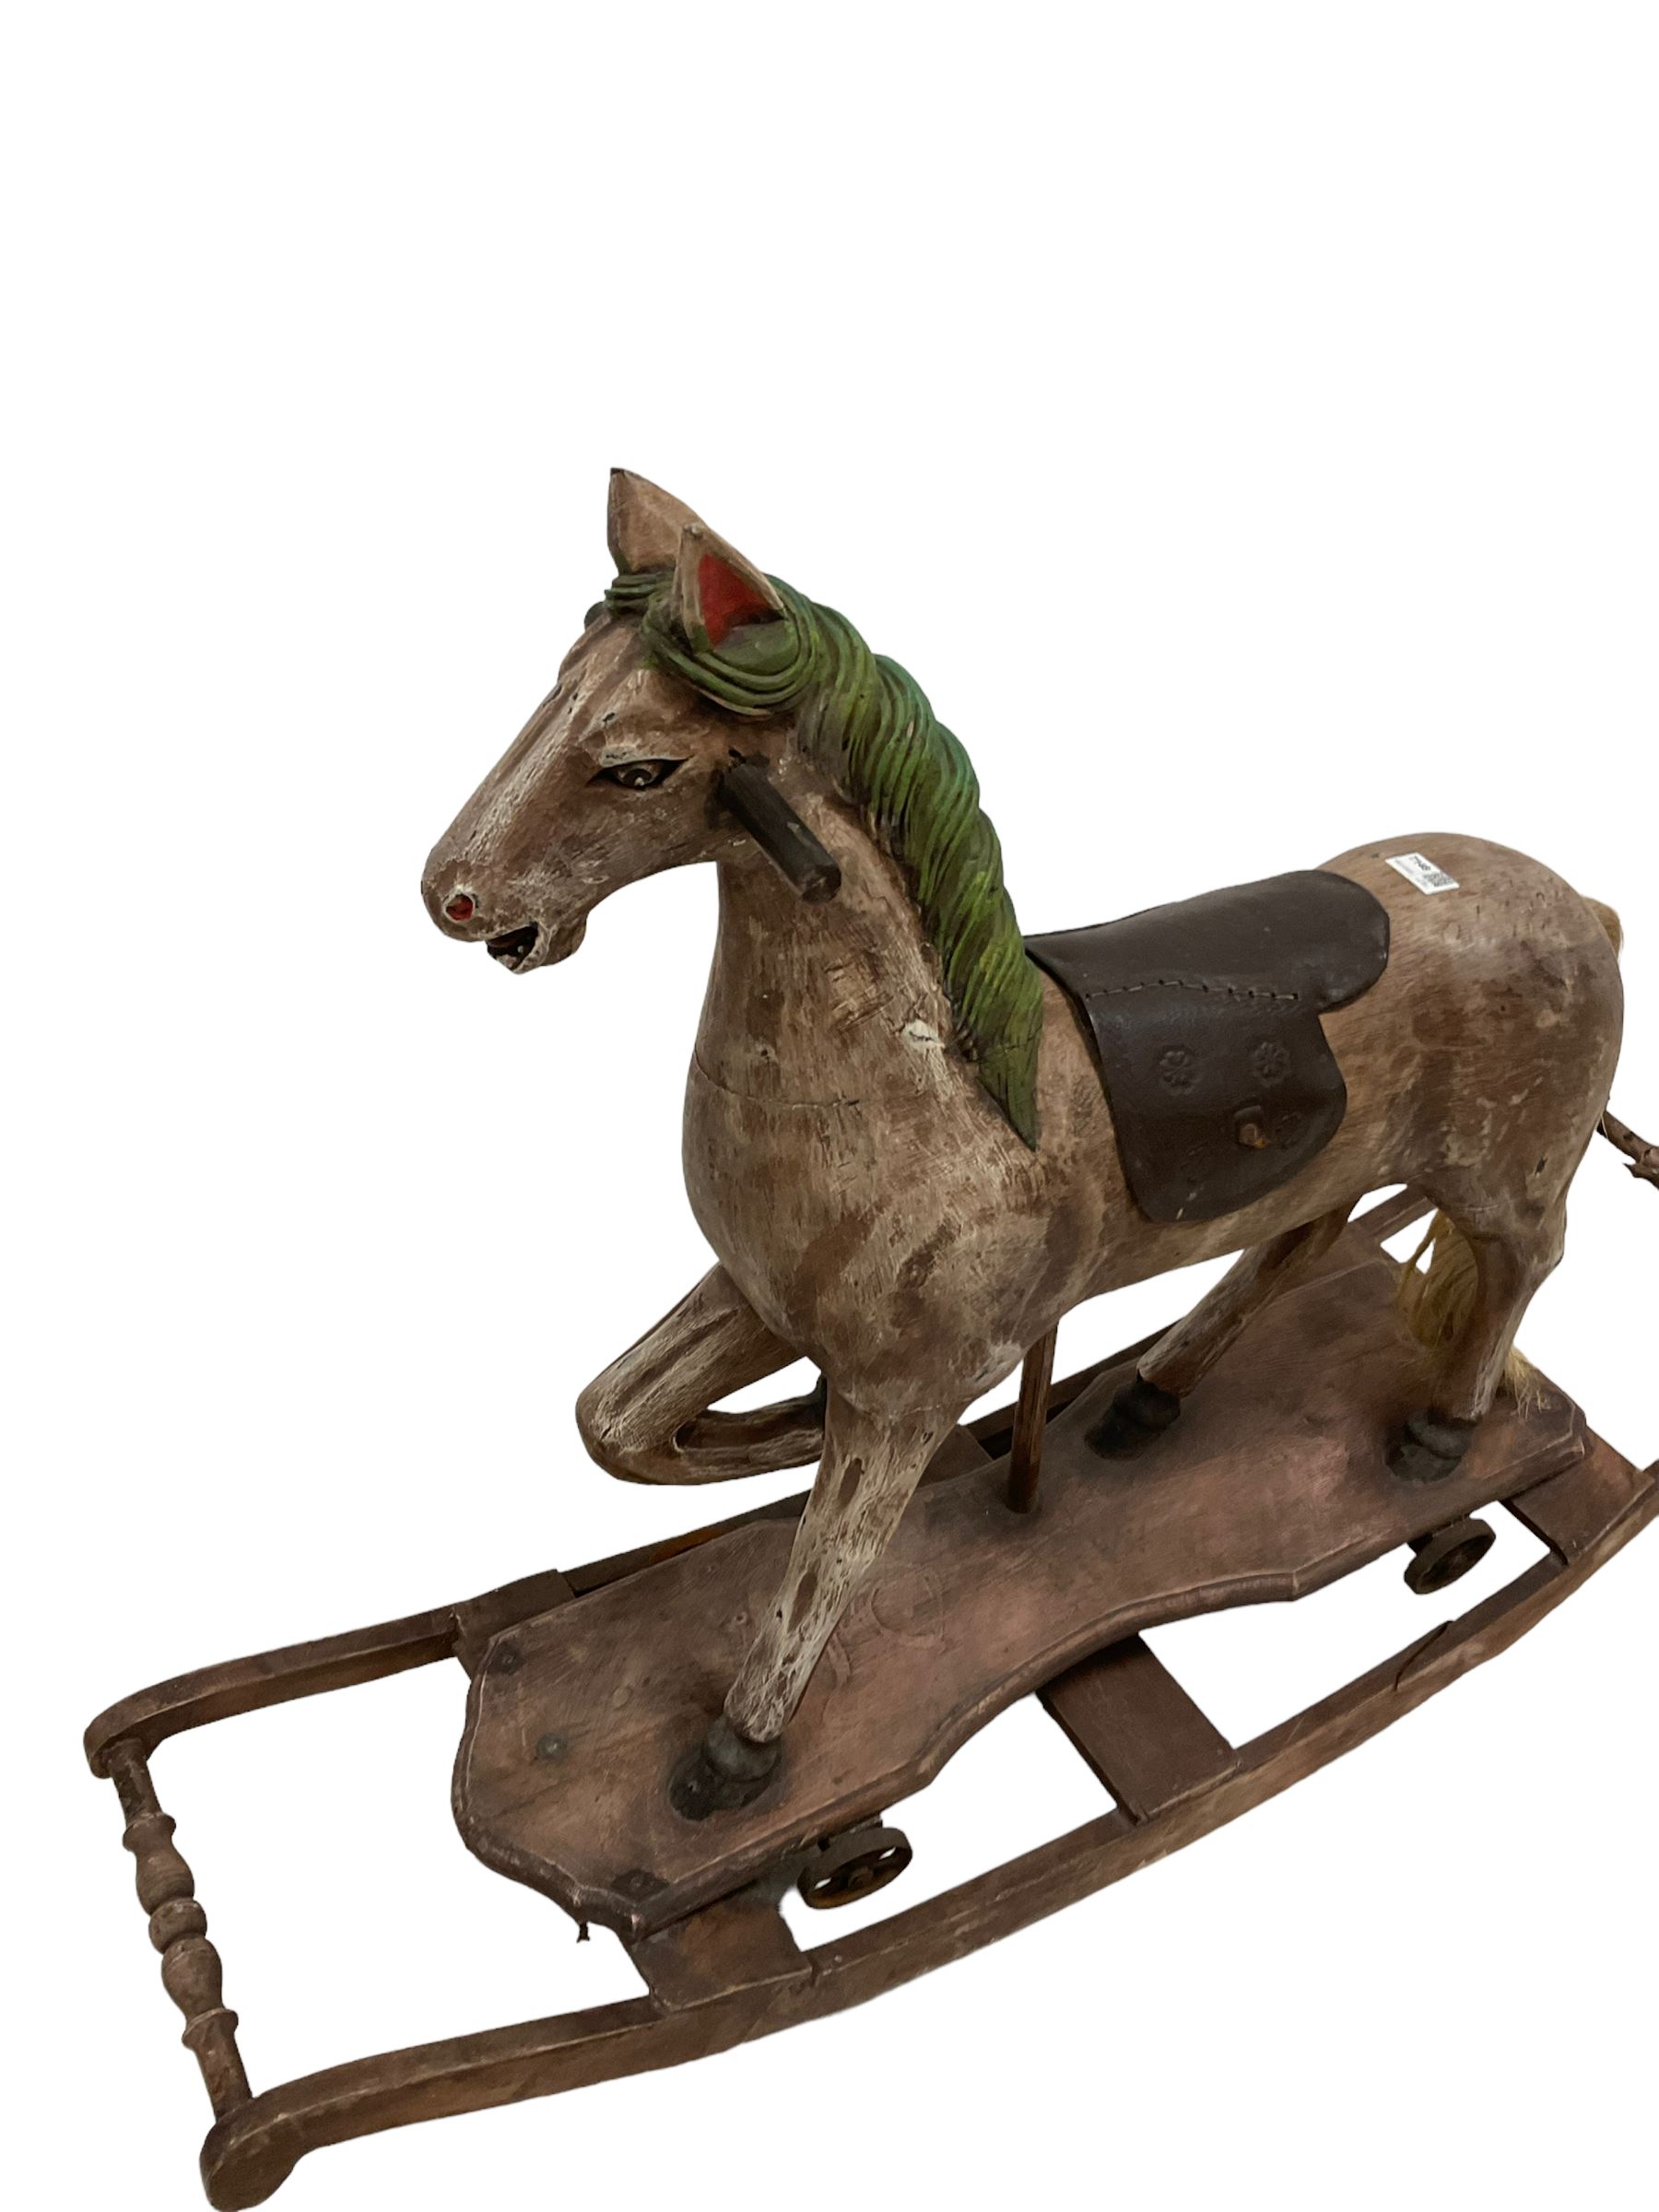 Small rocking horse - Image 4 of 4